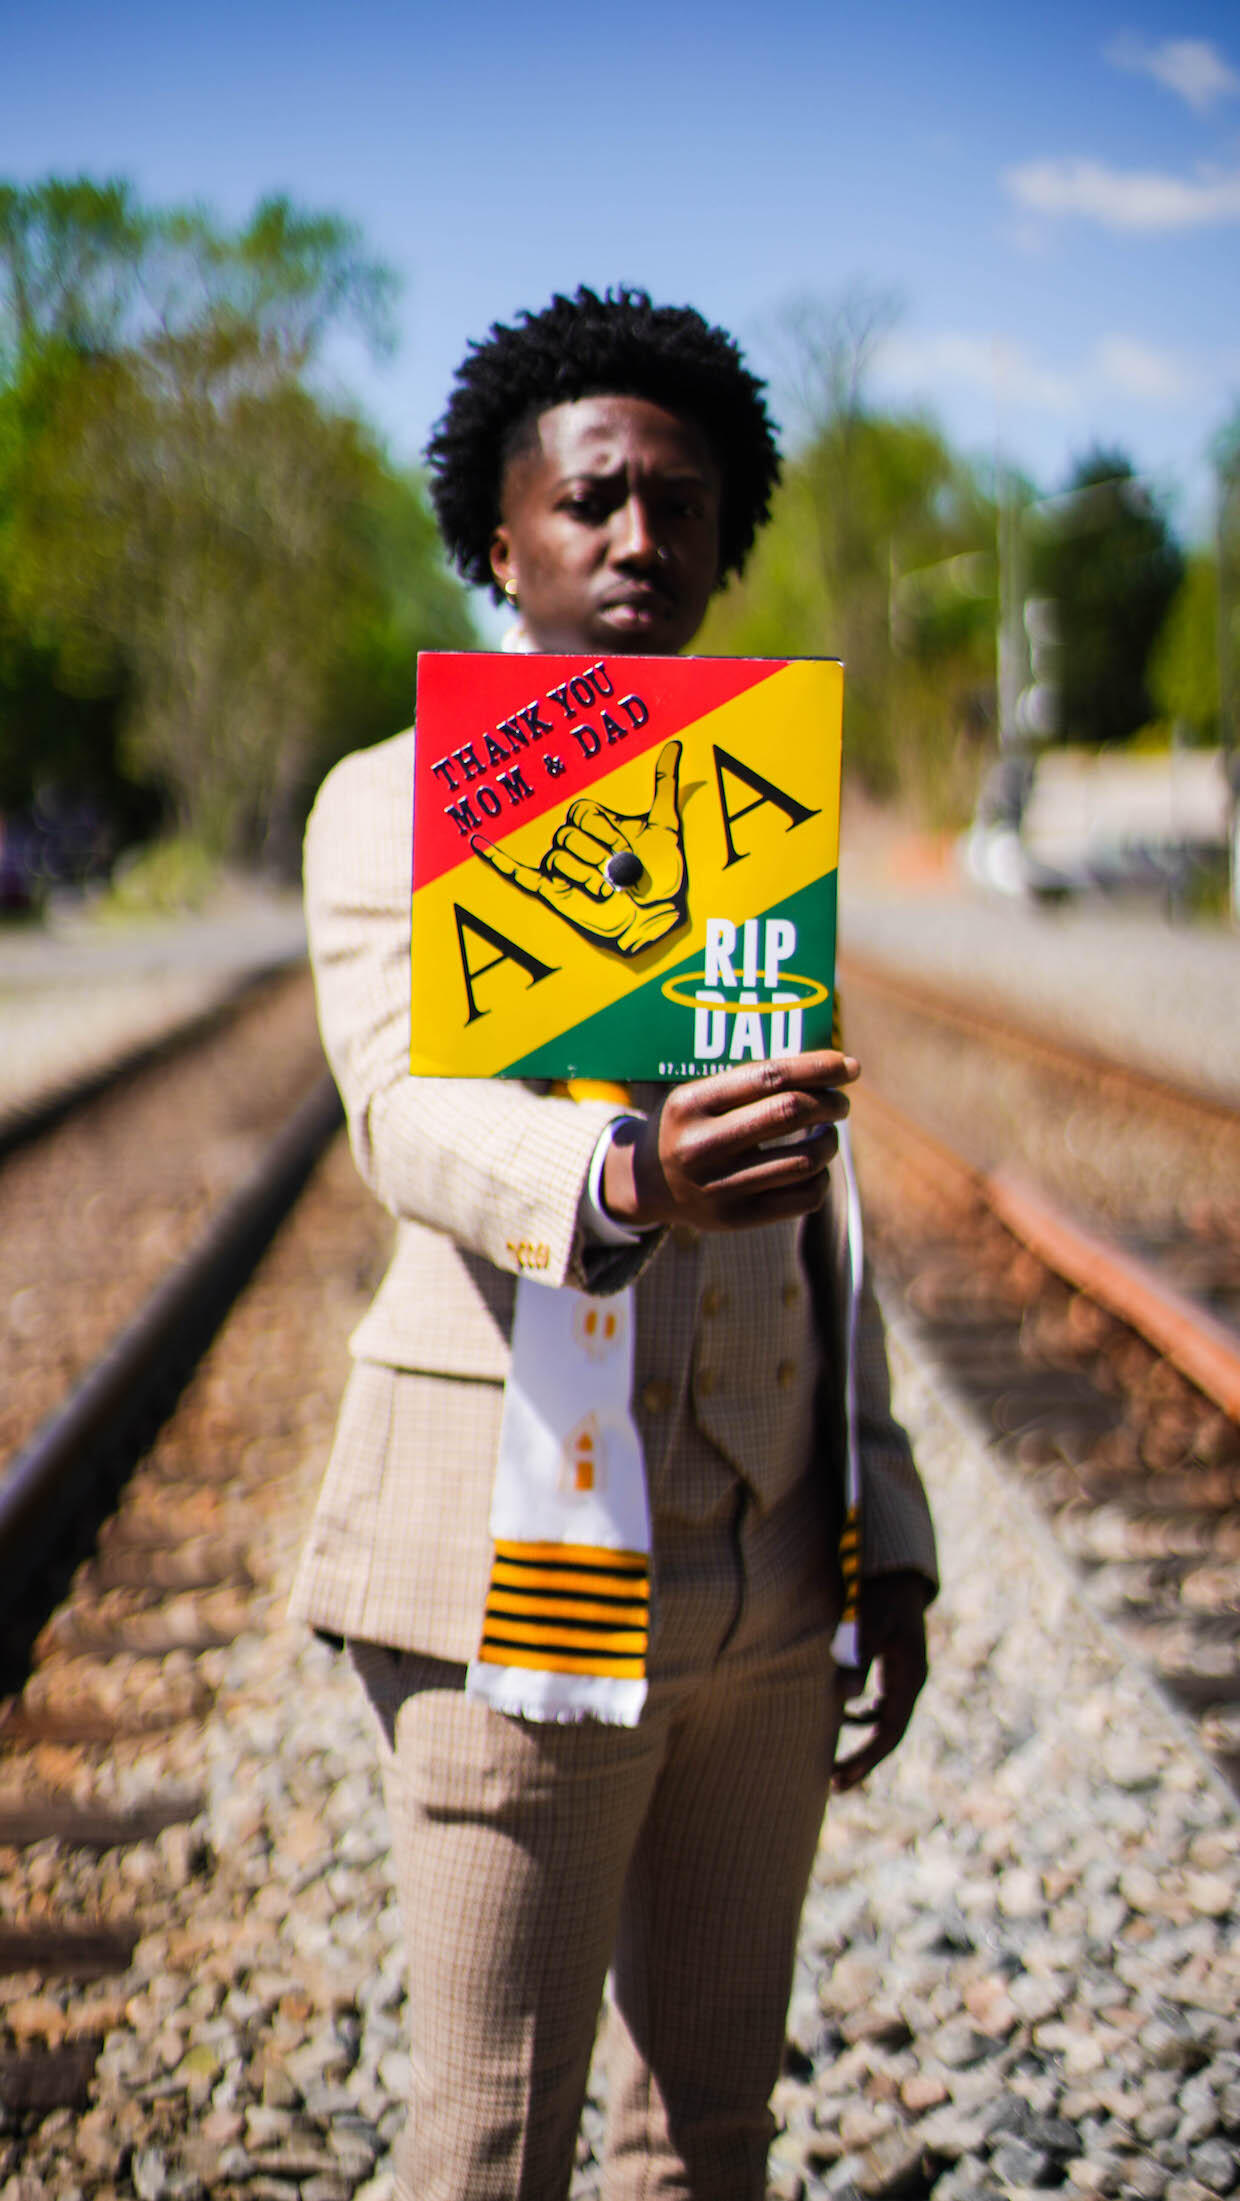 Gideon Boakye standing on train tracks, holding his graduation mortarboard, which is decorated with messages to his parents laid over the red, yellow and green stripes of the Ghanaian flag.